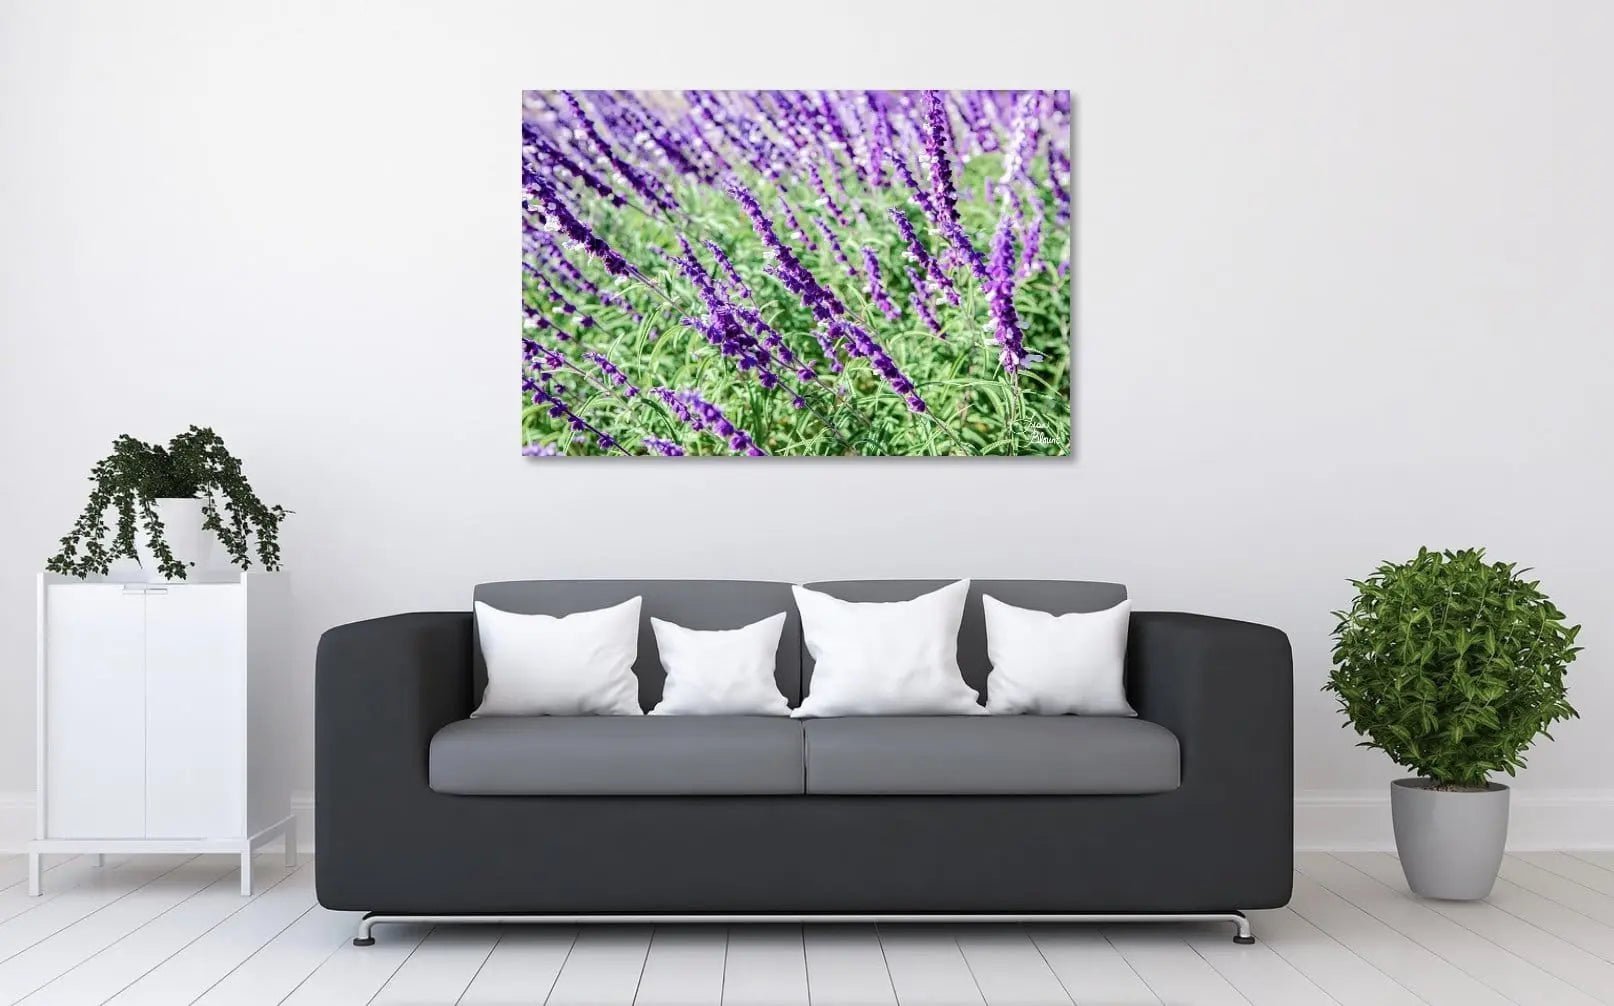 30x20 art of purple lavender blooming hanging above a couch